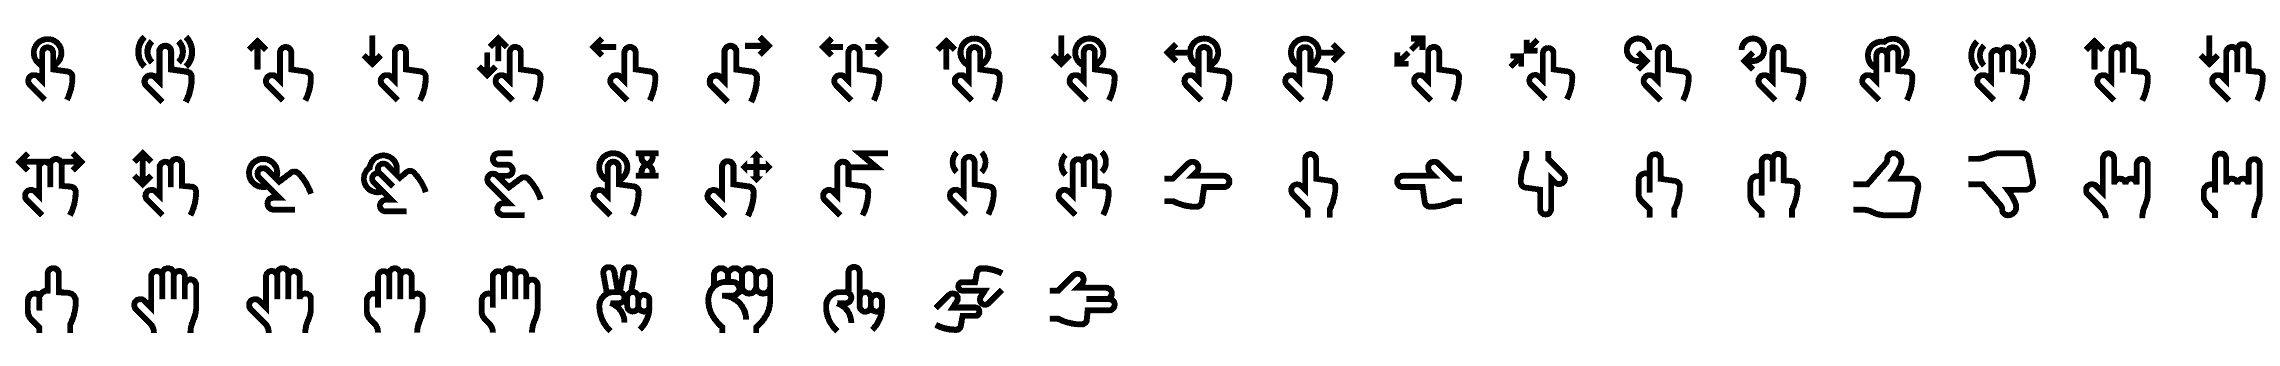 hand-gesture-mini-bold-icons-preview-settings